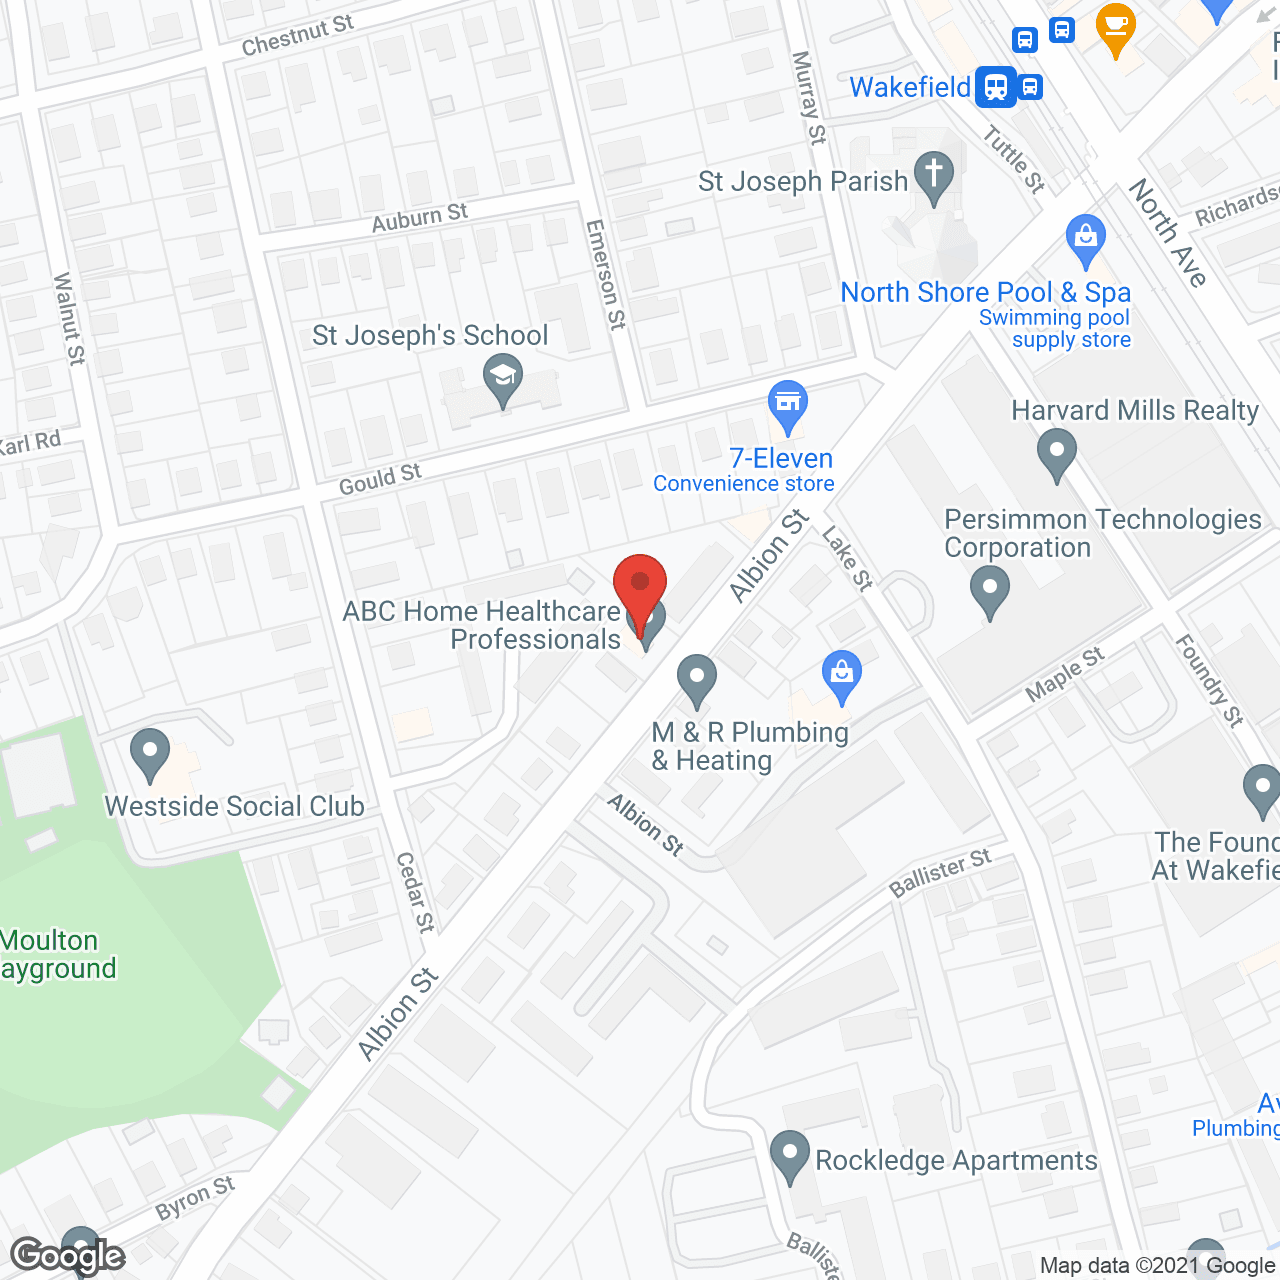 ABC Home Healthcare Professionals in google map